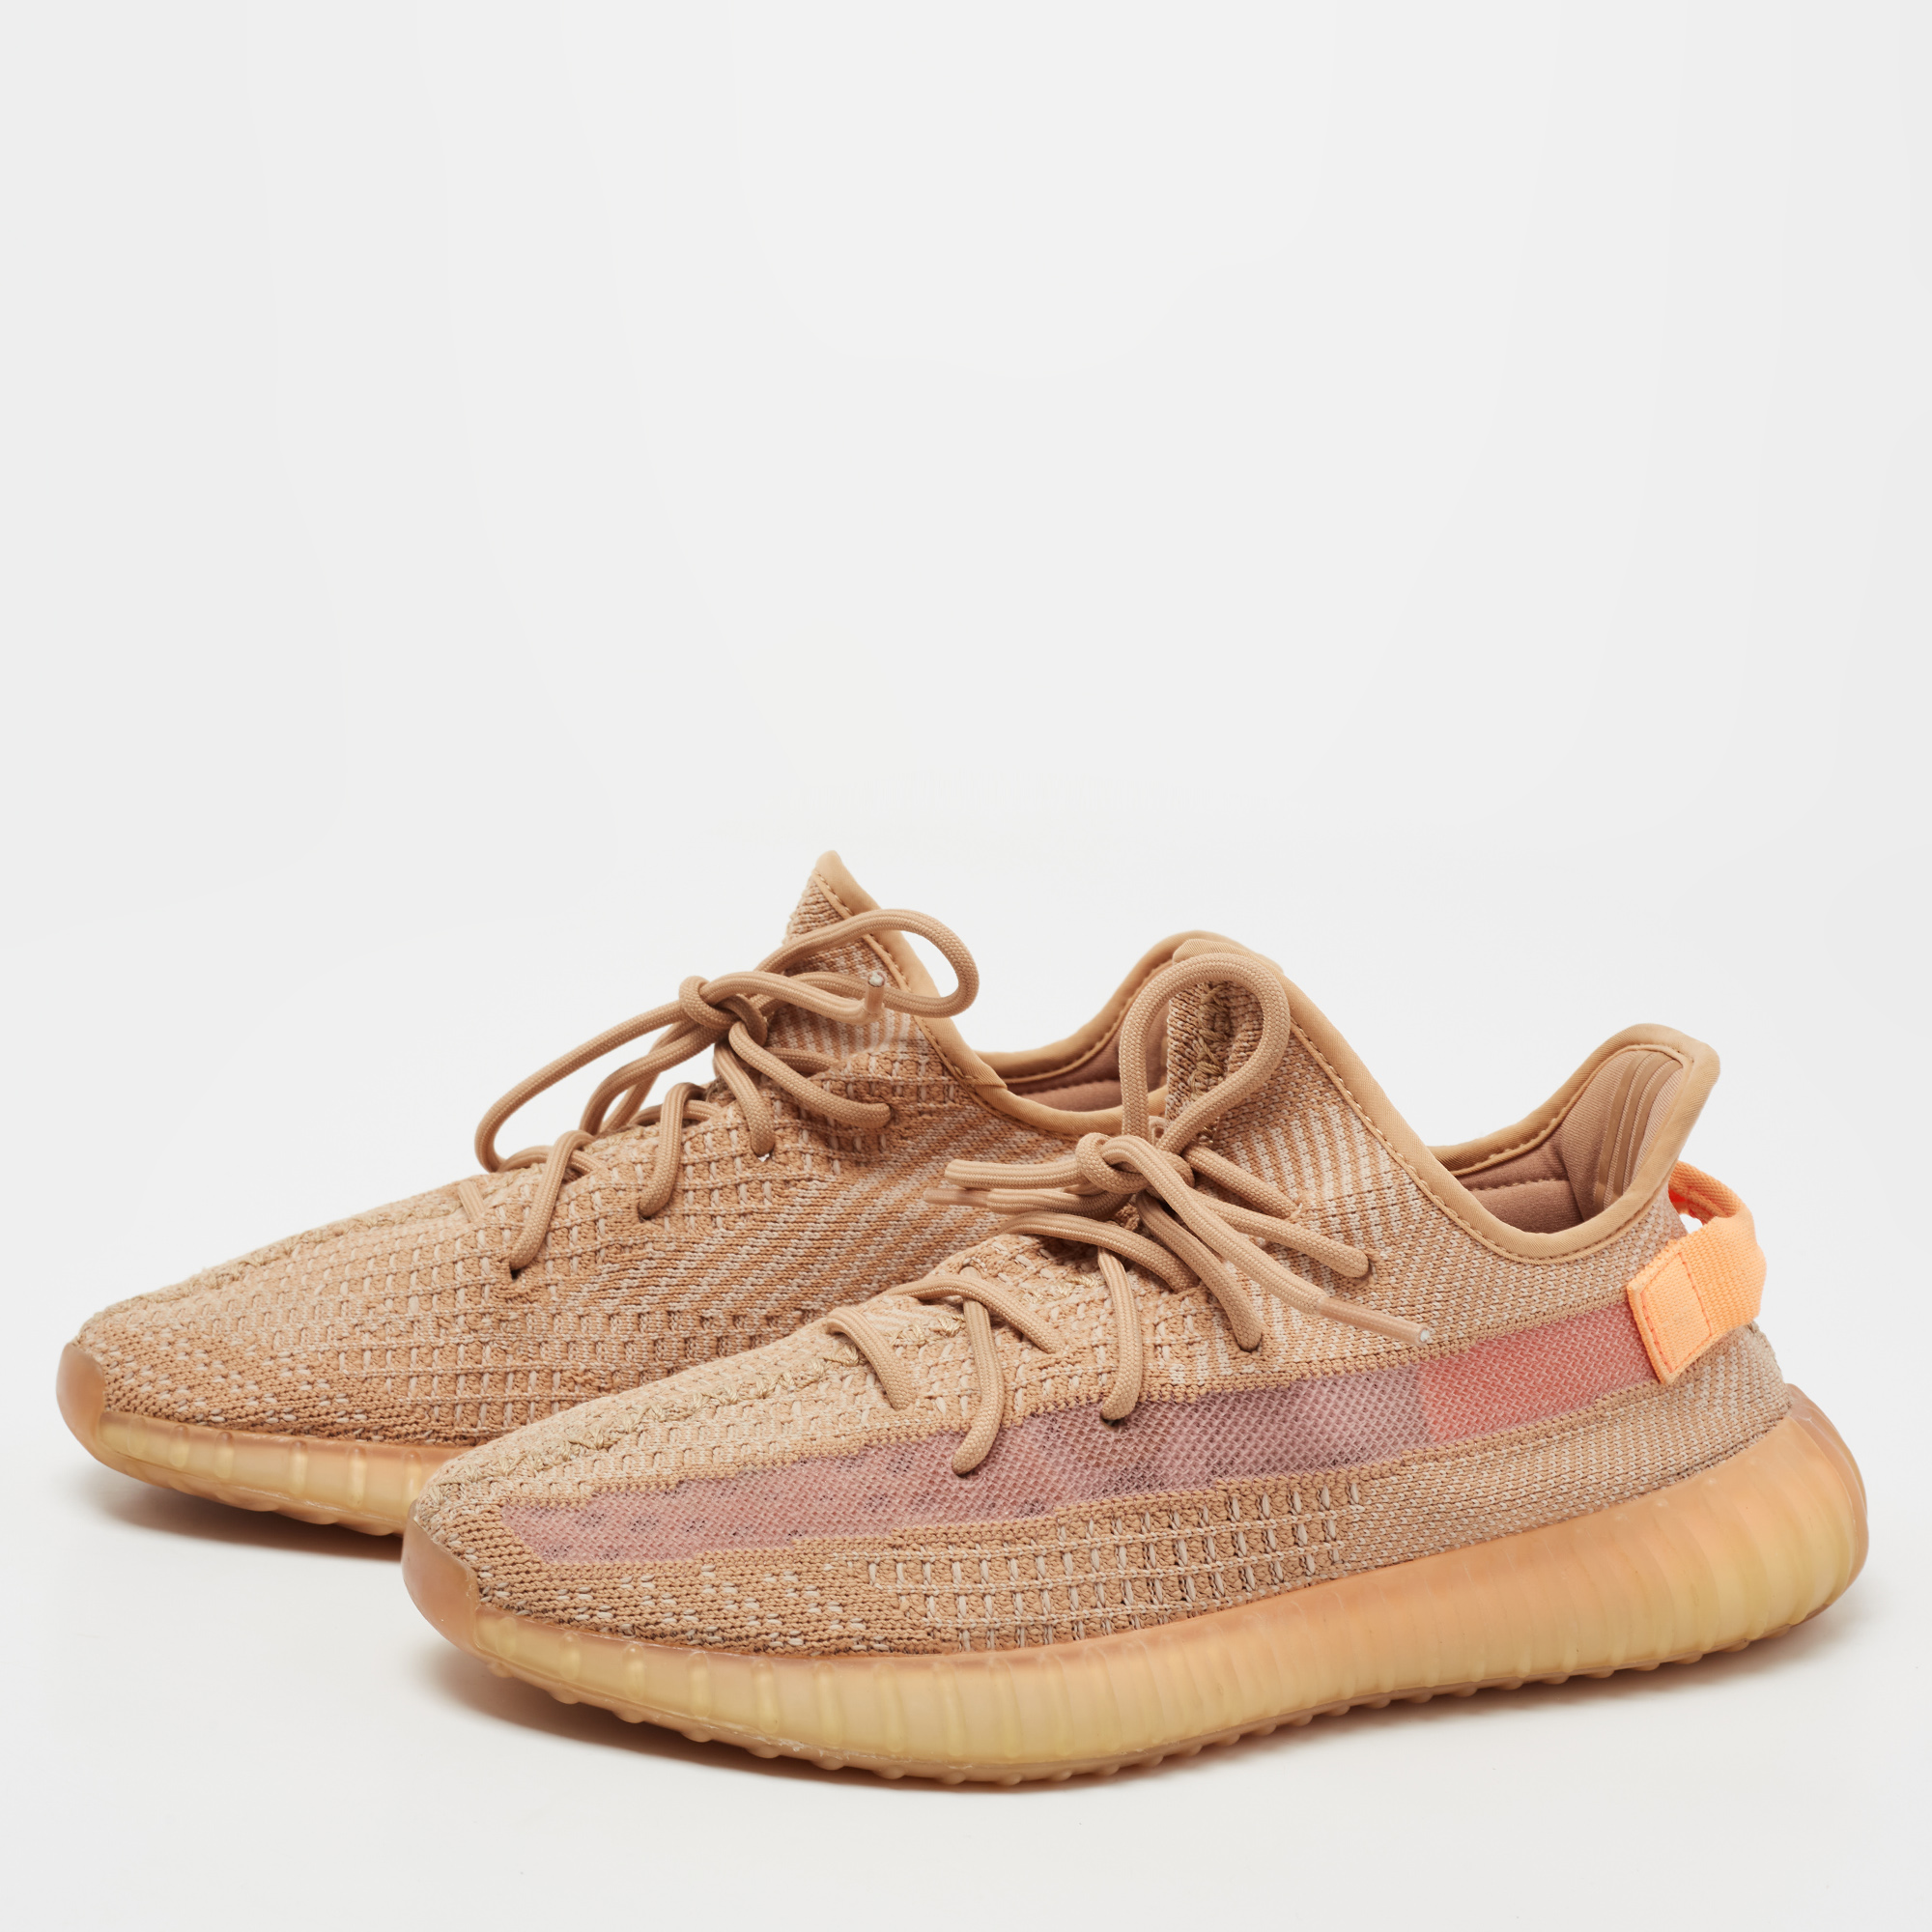 

Yeezy x Adidas Orange Knit Fabric Boost 350 V2 Clay Sneakers Size 43 1/3